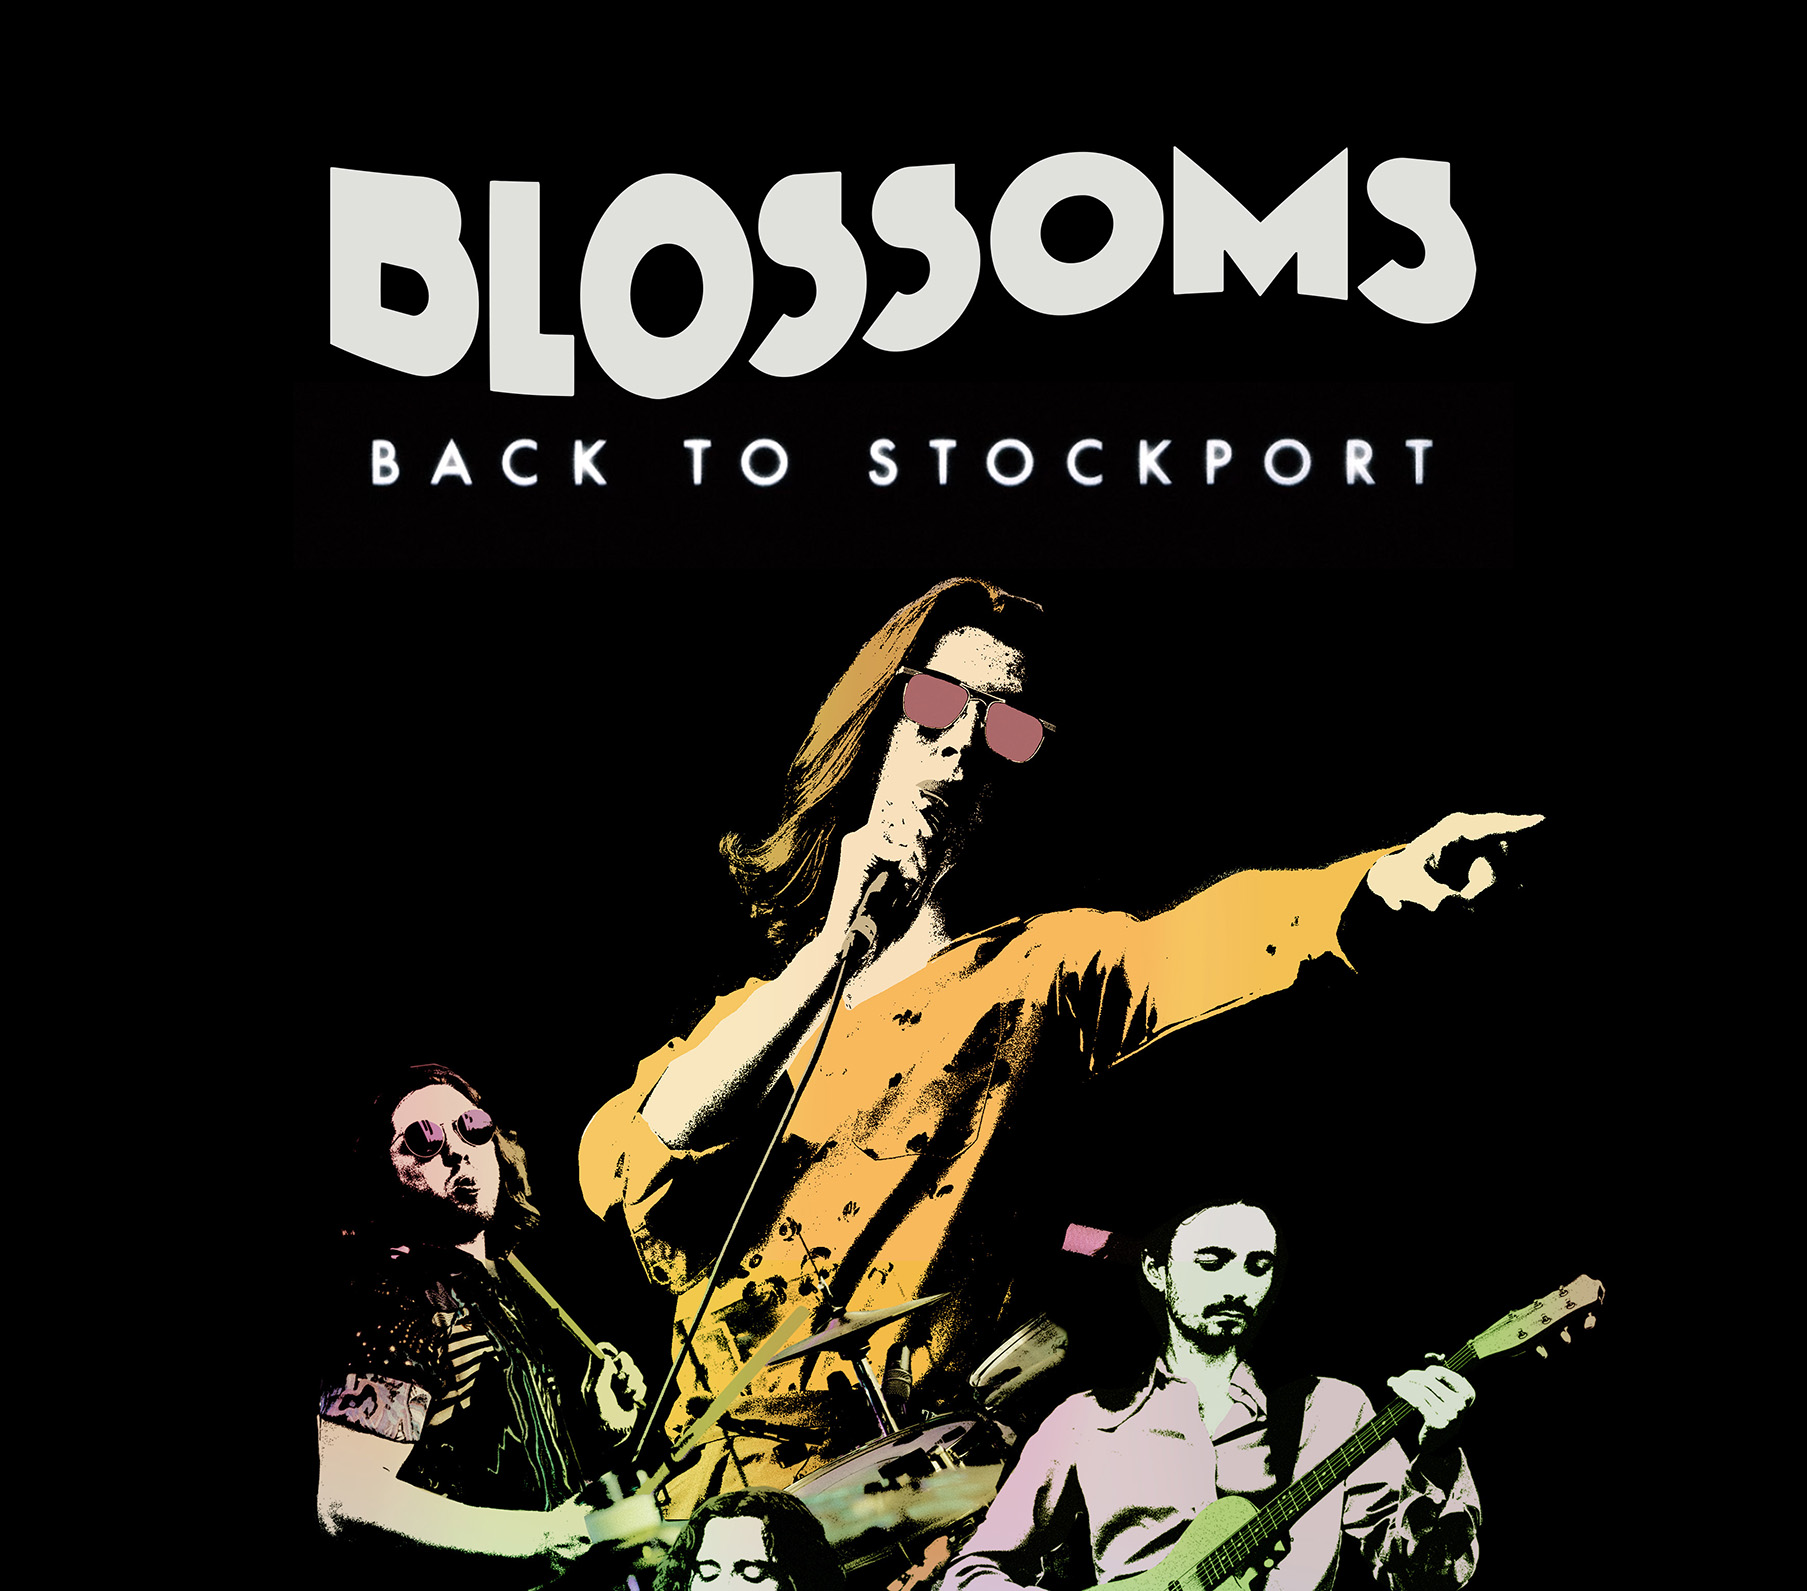 BLOSSOMS announce details of their brand-new, feature-length documentary 'BACK TO STOCKPORT' 1